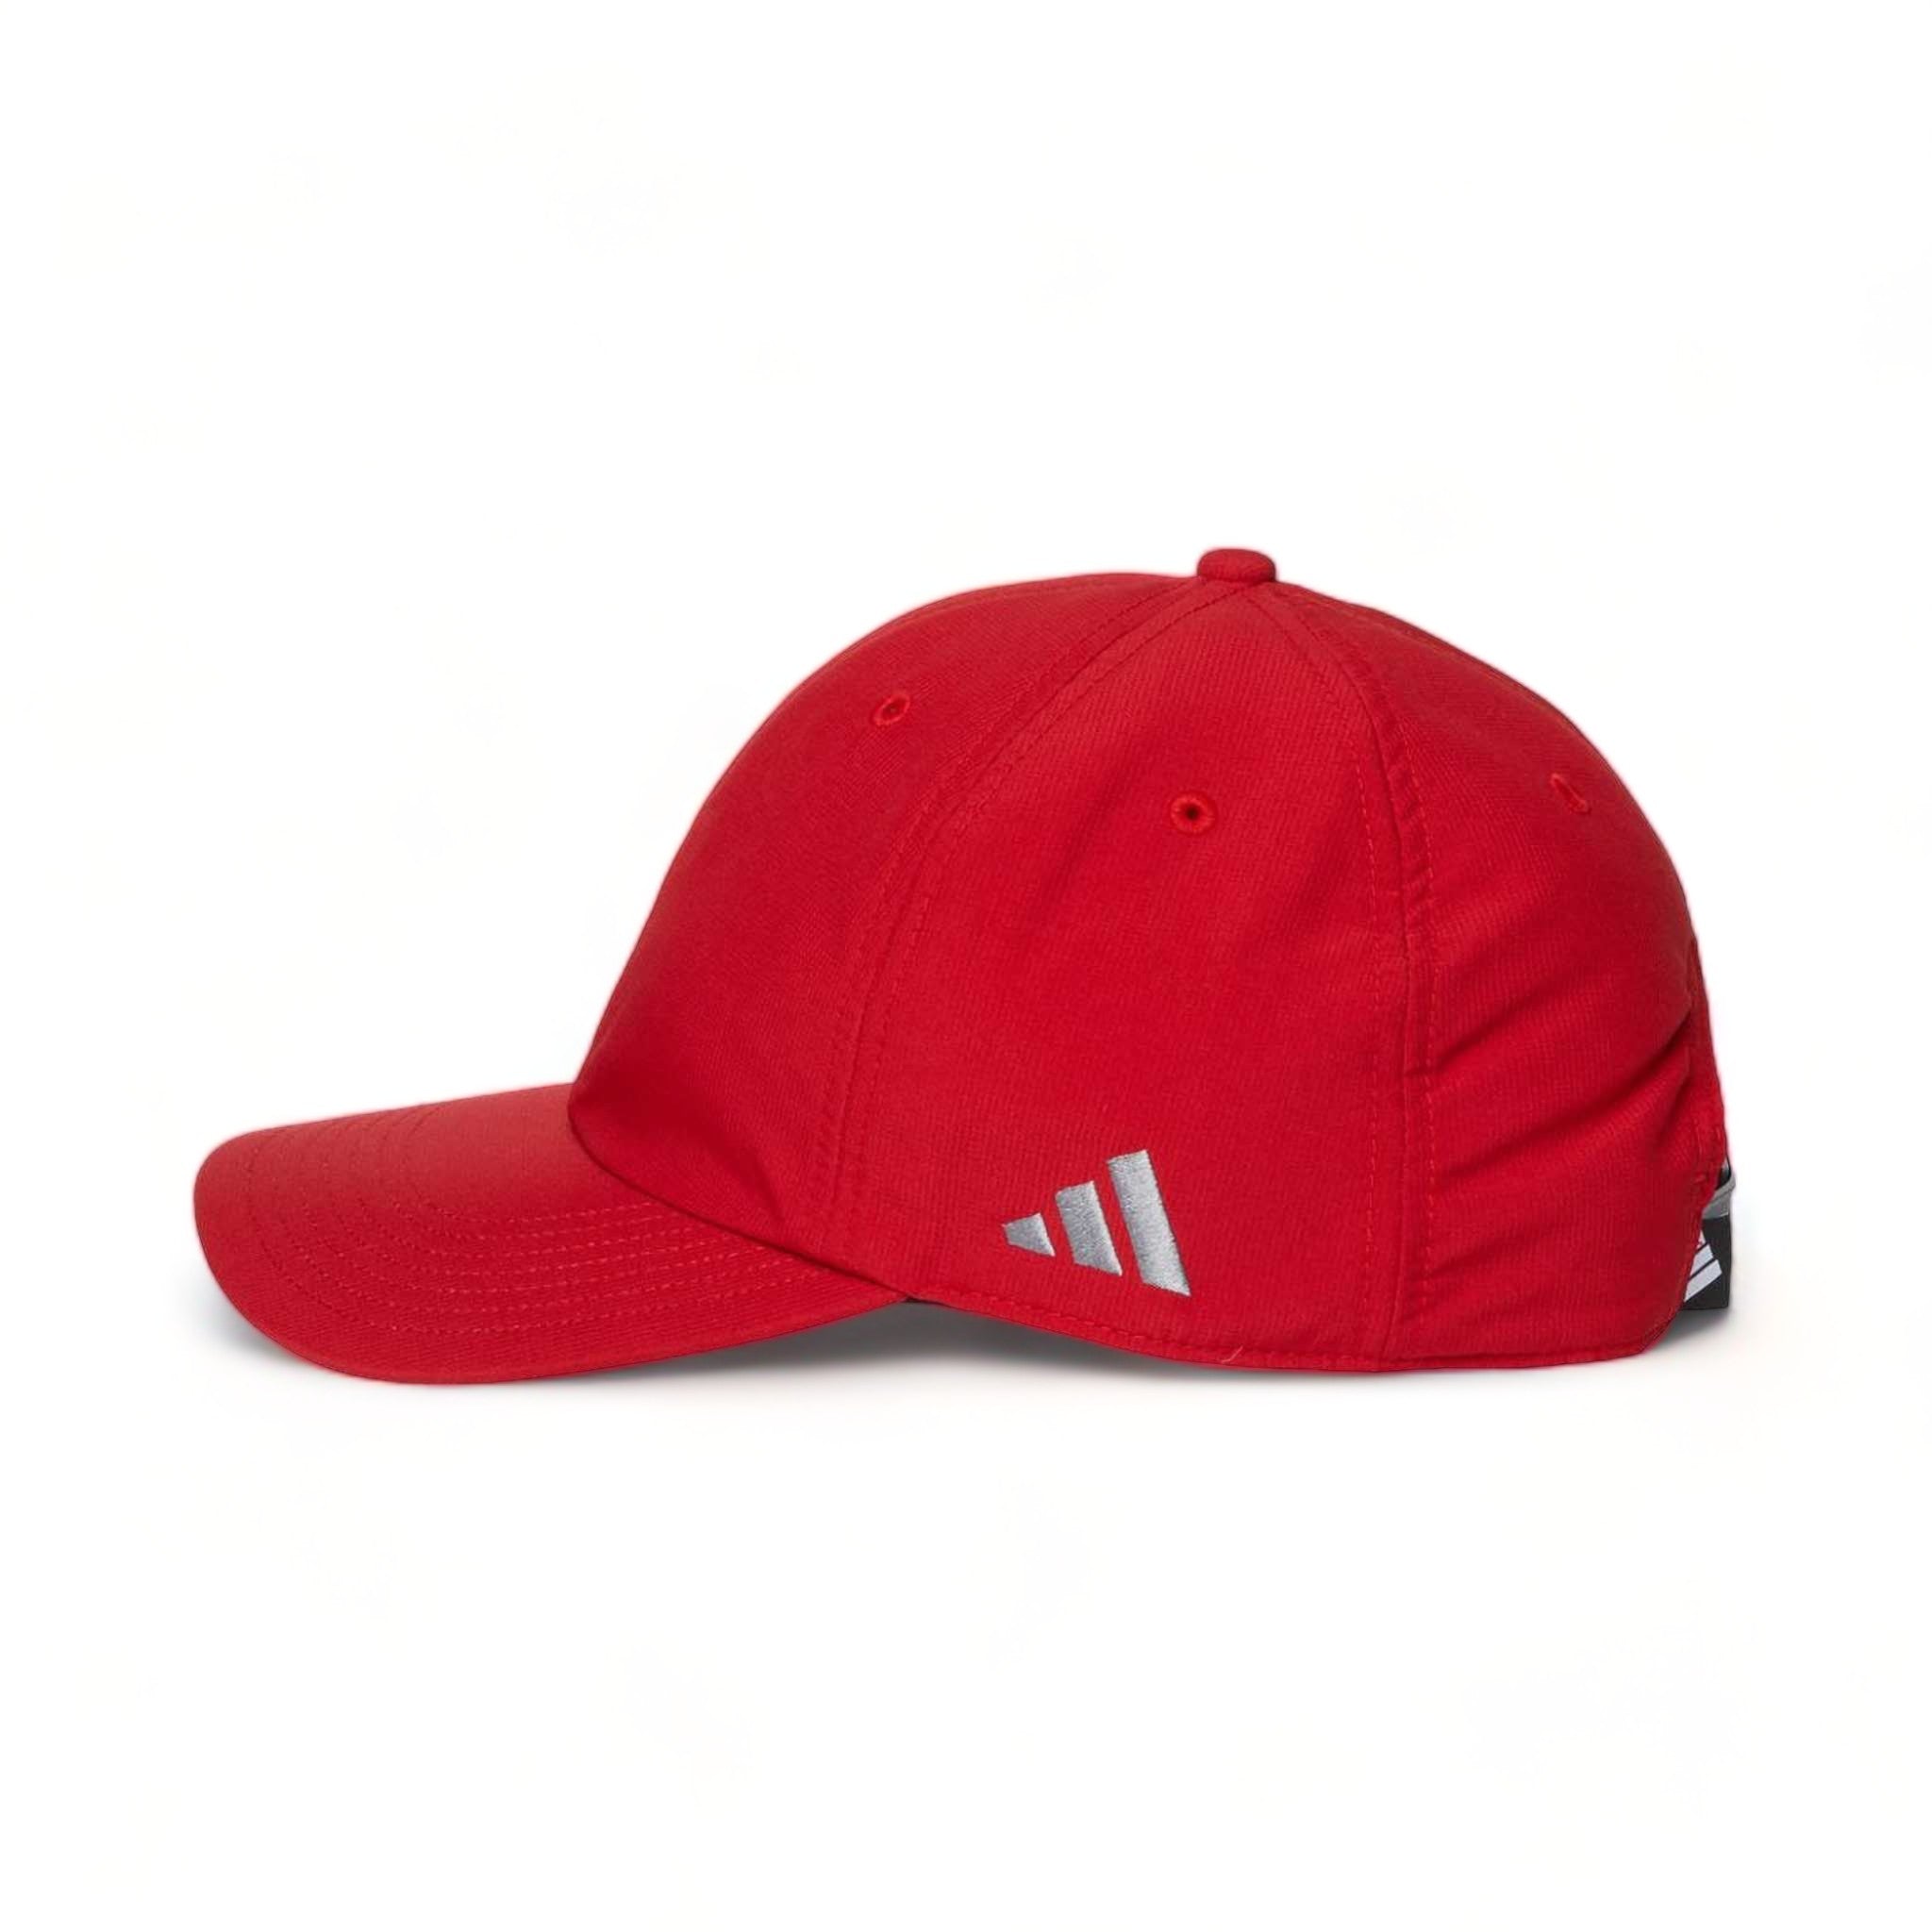 Side view of Adidas A600S custom hat in power red